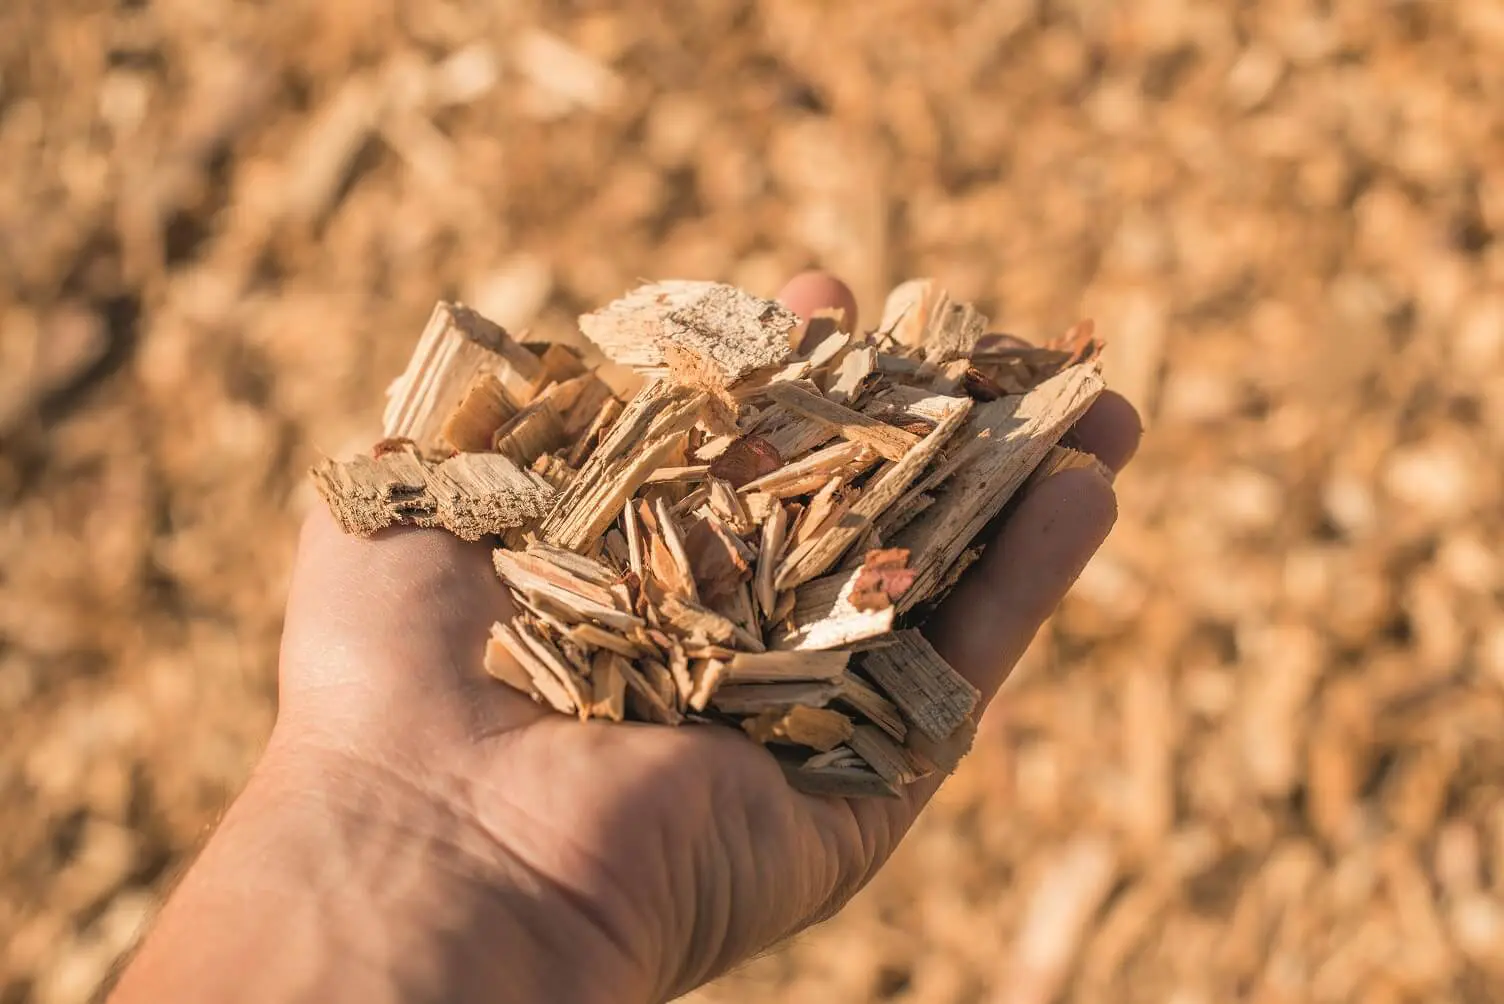 Eco-mobilier - wood chips